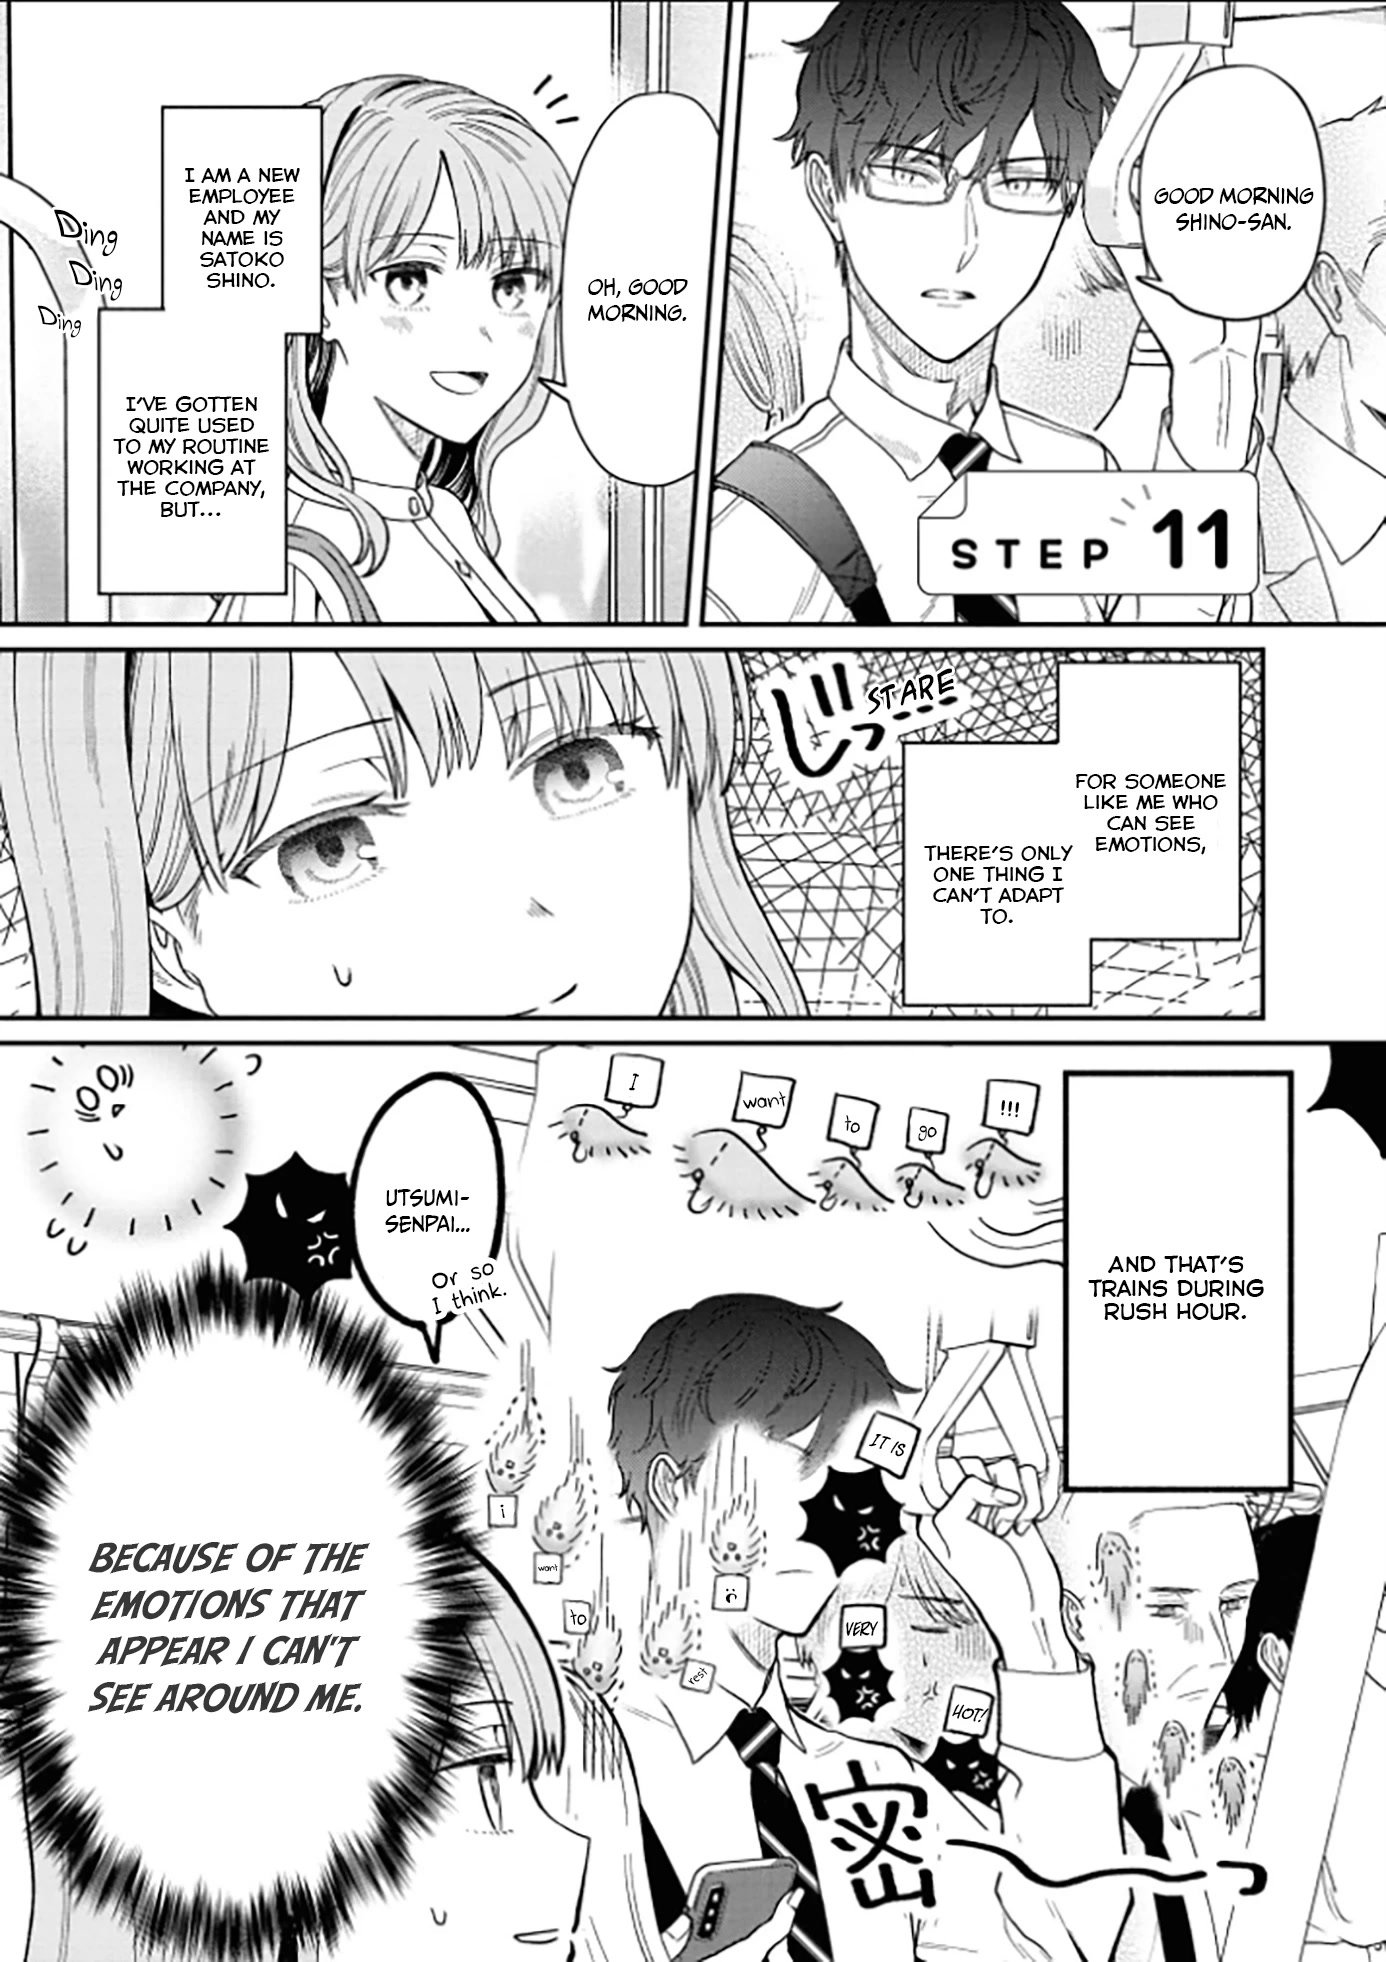 The New-Hire Who Could "Read" Emotions and the Unsociable Senpai - chapter 11 - #2